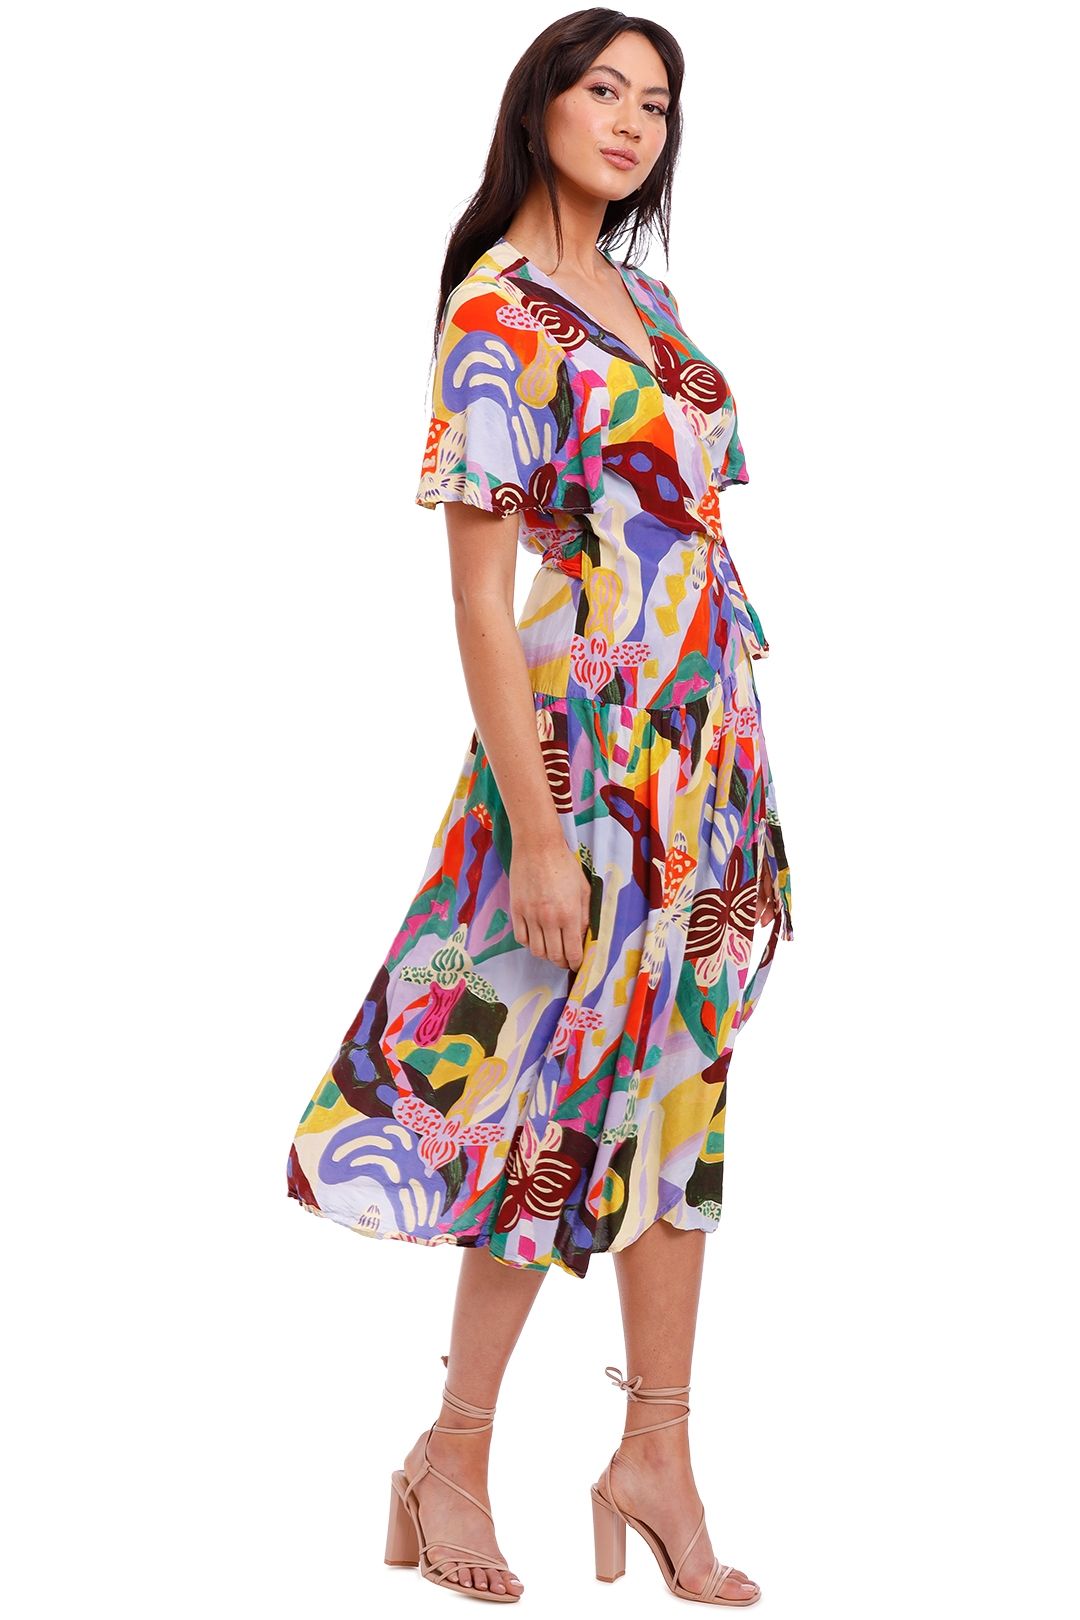 Wild Orchid Wrap Dress by Gorman for Hire | GlamCorner